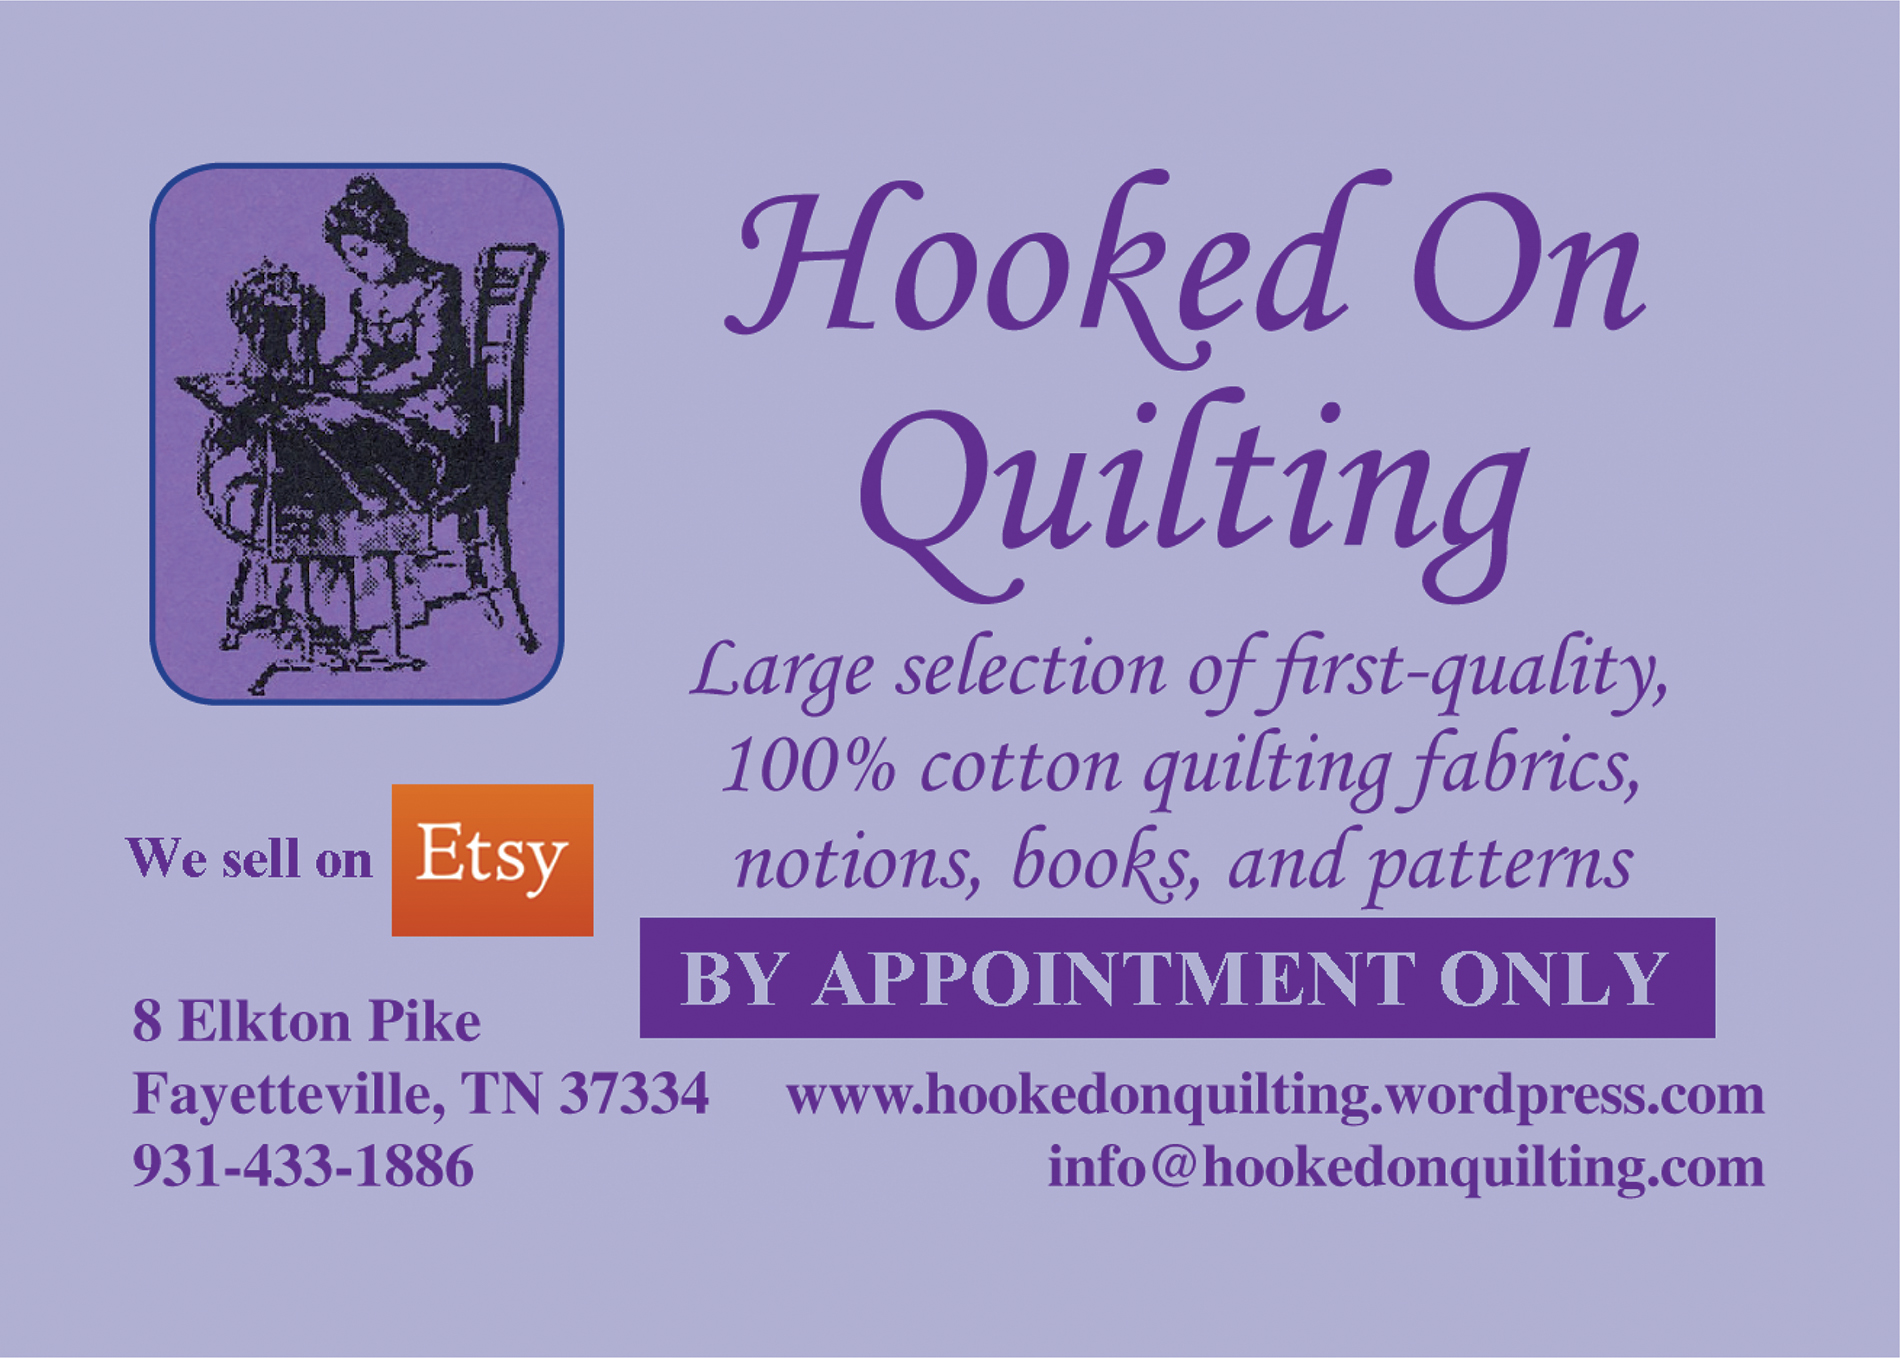 hooked on quilting ad